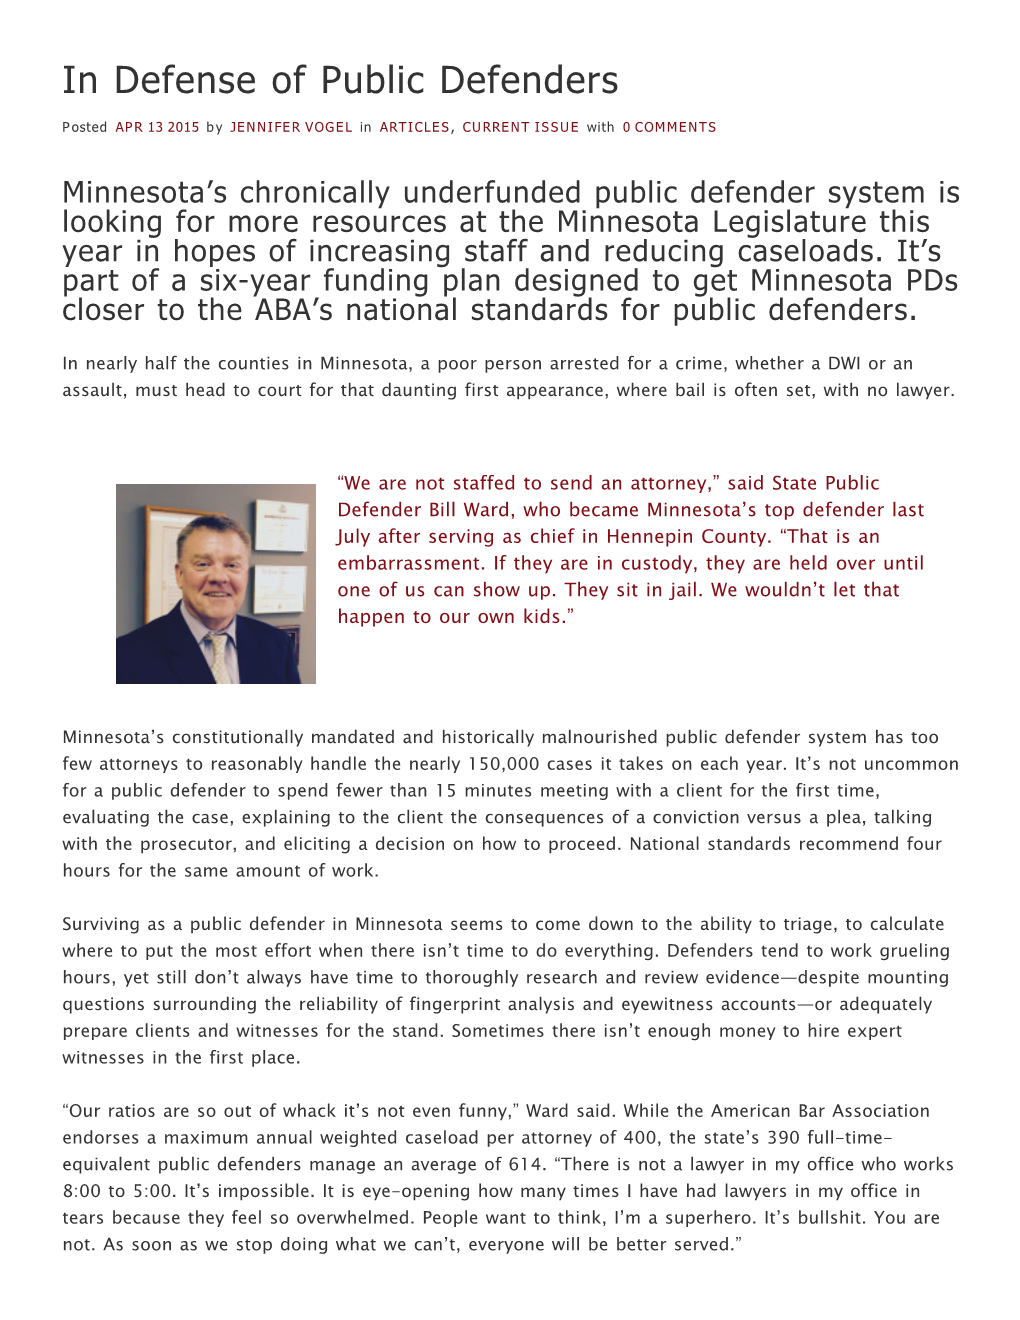 In Defense of Public Defenders | Bench and Bar of Minnesota in Defense of Public Defenders